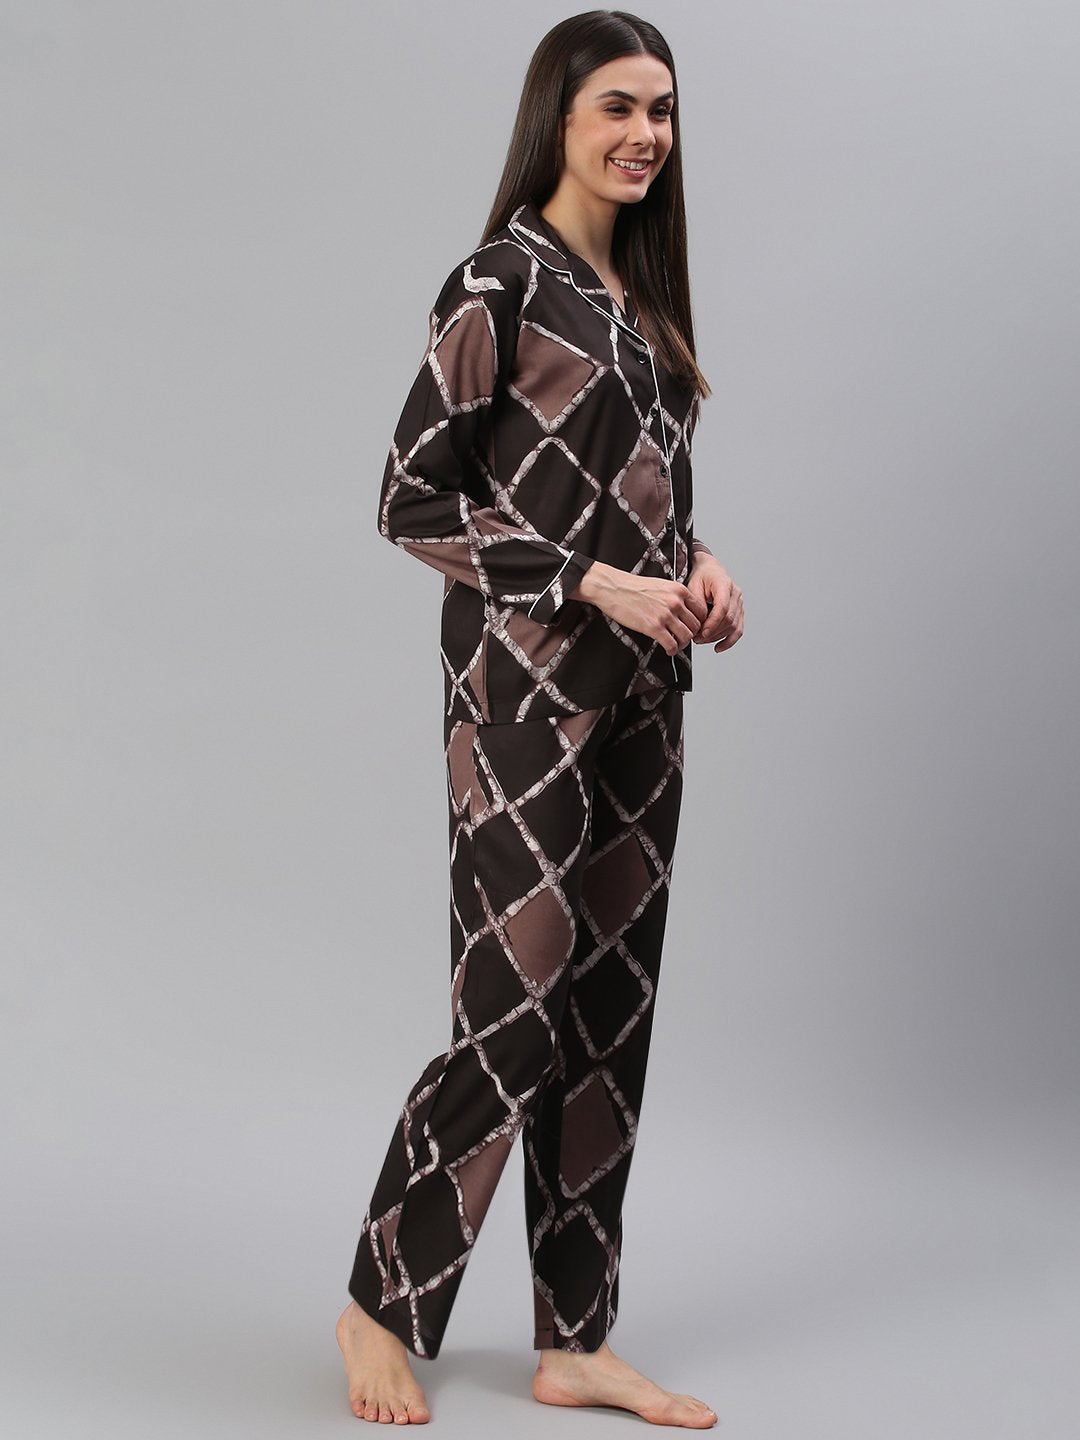 Cation Brown Printed Night Suit